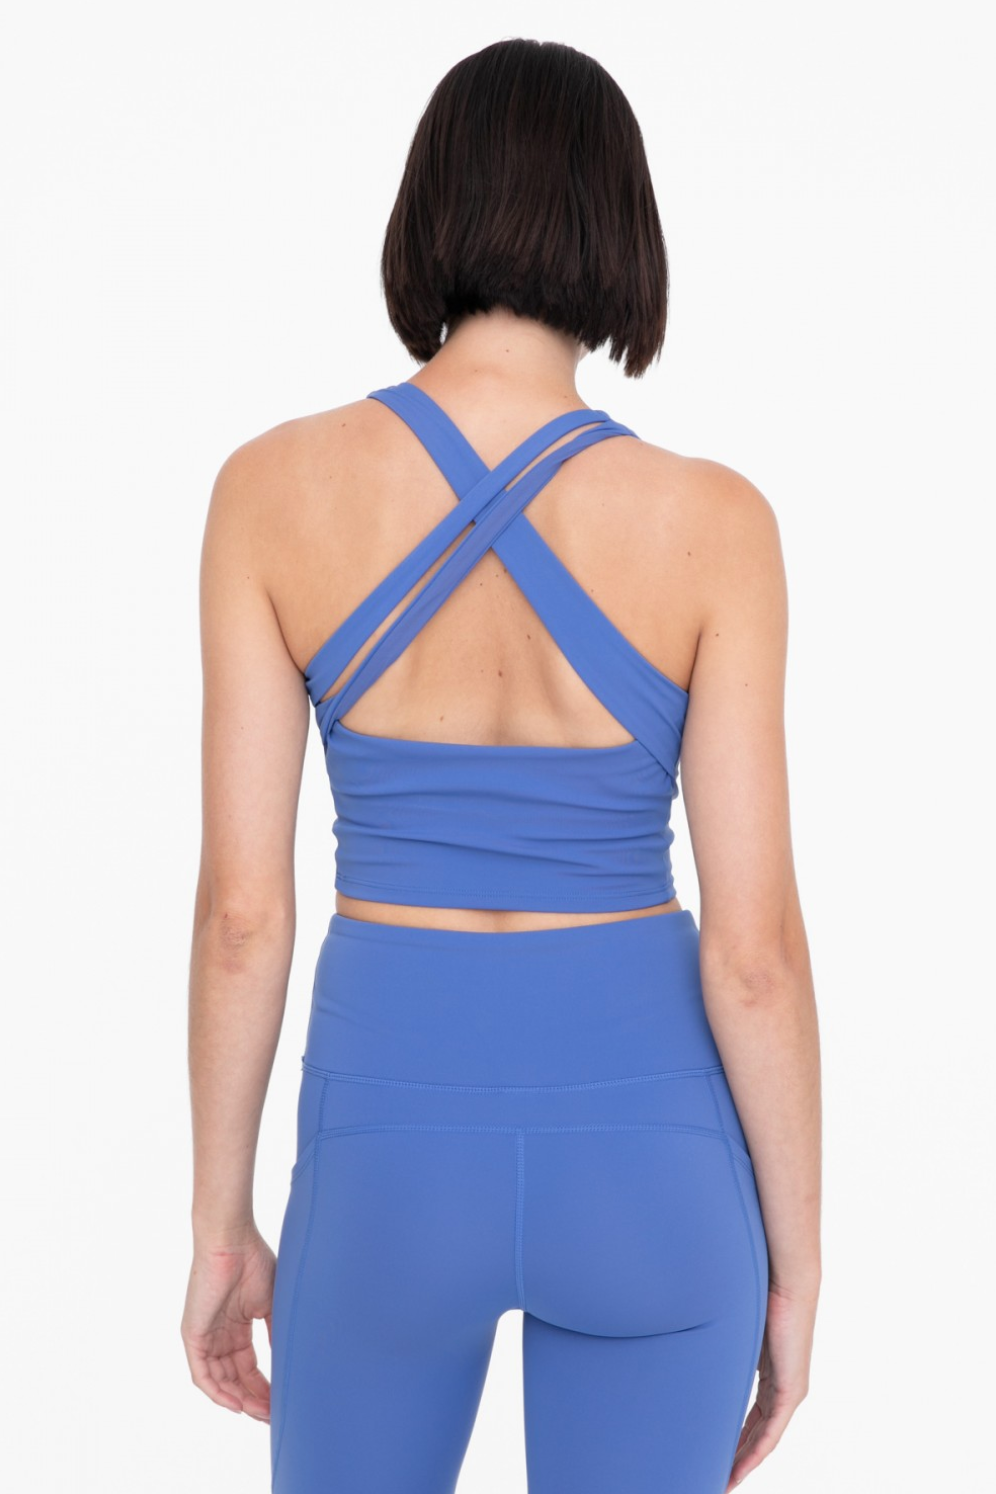 Strap Back Cropped Top with Built-In Sports Bra – Bella and Bloom